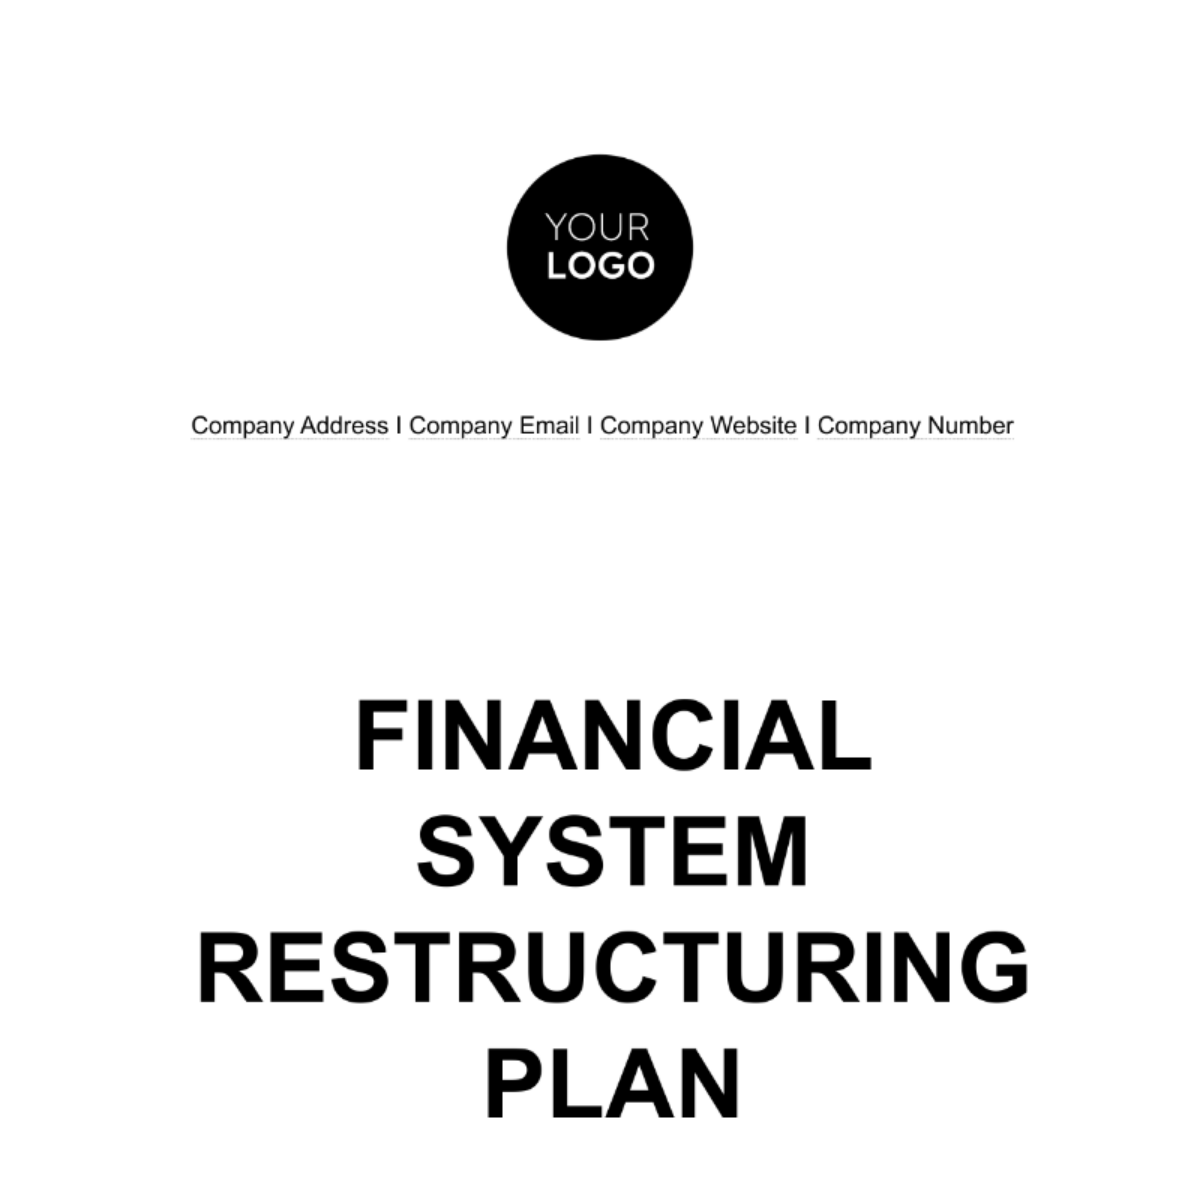 Free Financial System Restructuring Plan Template